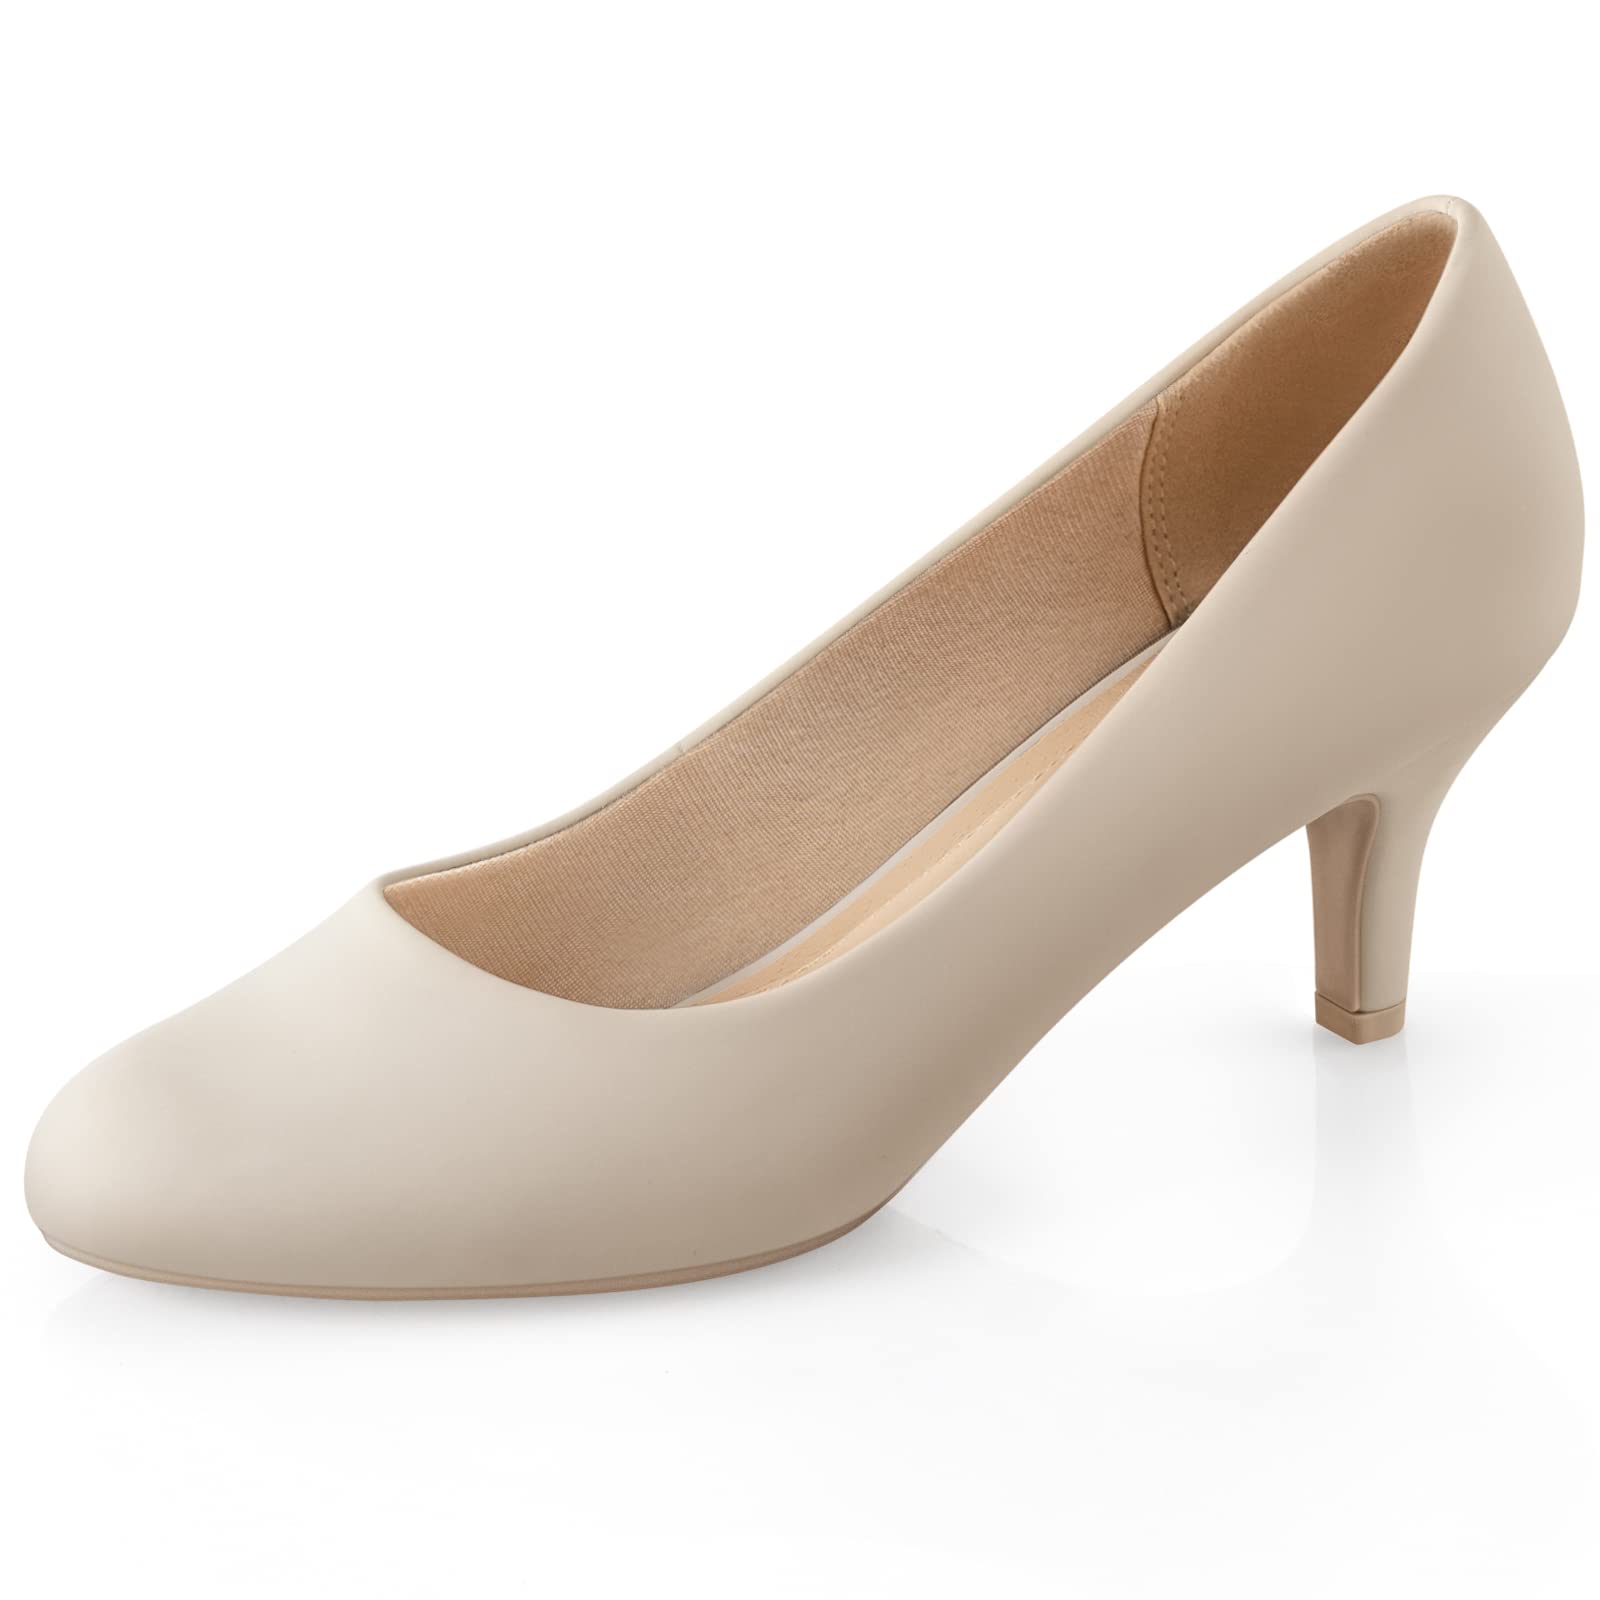 Ankis Pumps for Women -2.5 Inch Nude